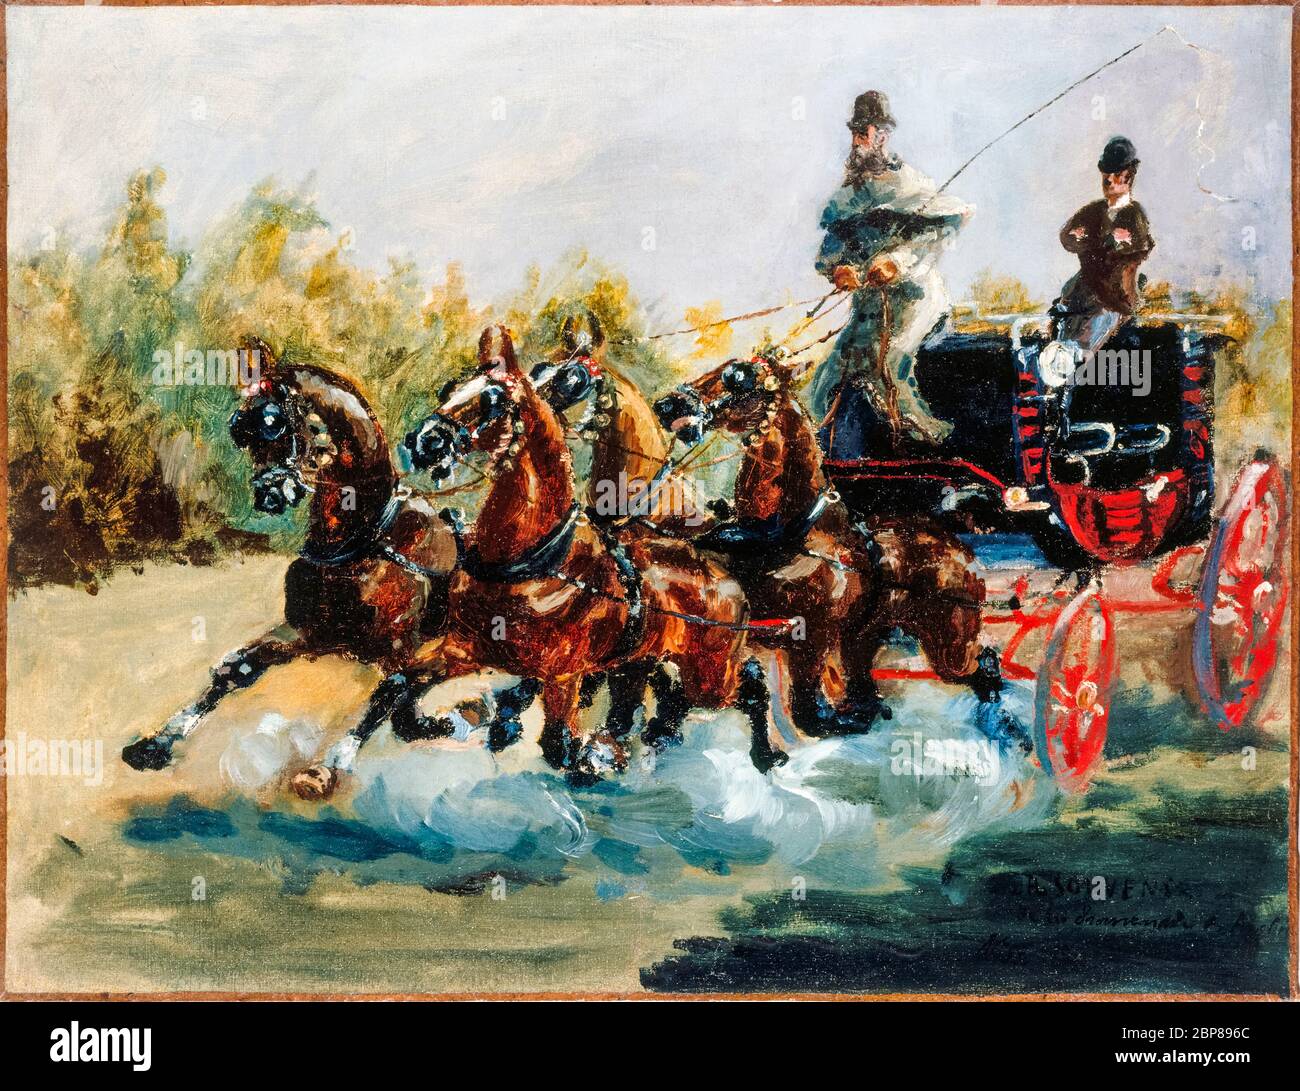 Horse Drawn Carriage, Nice, painting by Henri de Toulouse-Lautrec, 1880 Stock Photo